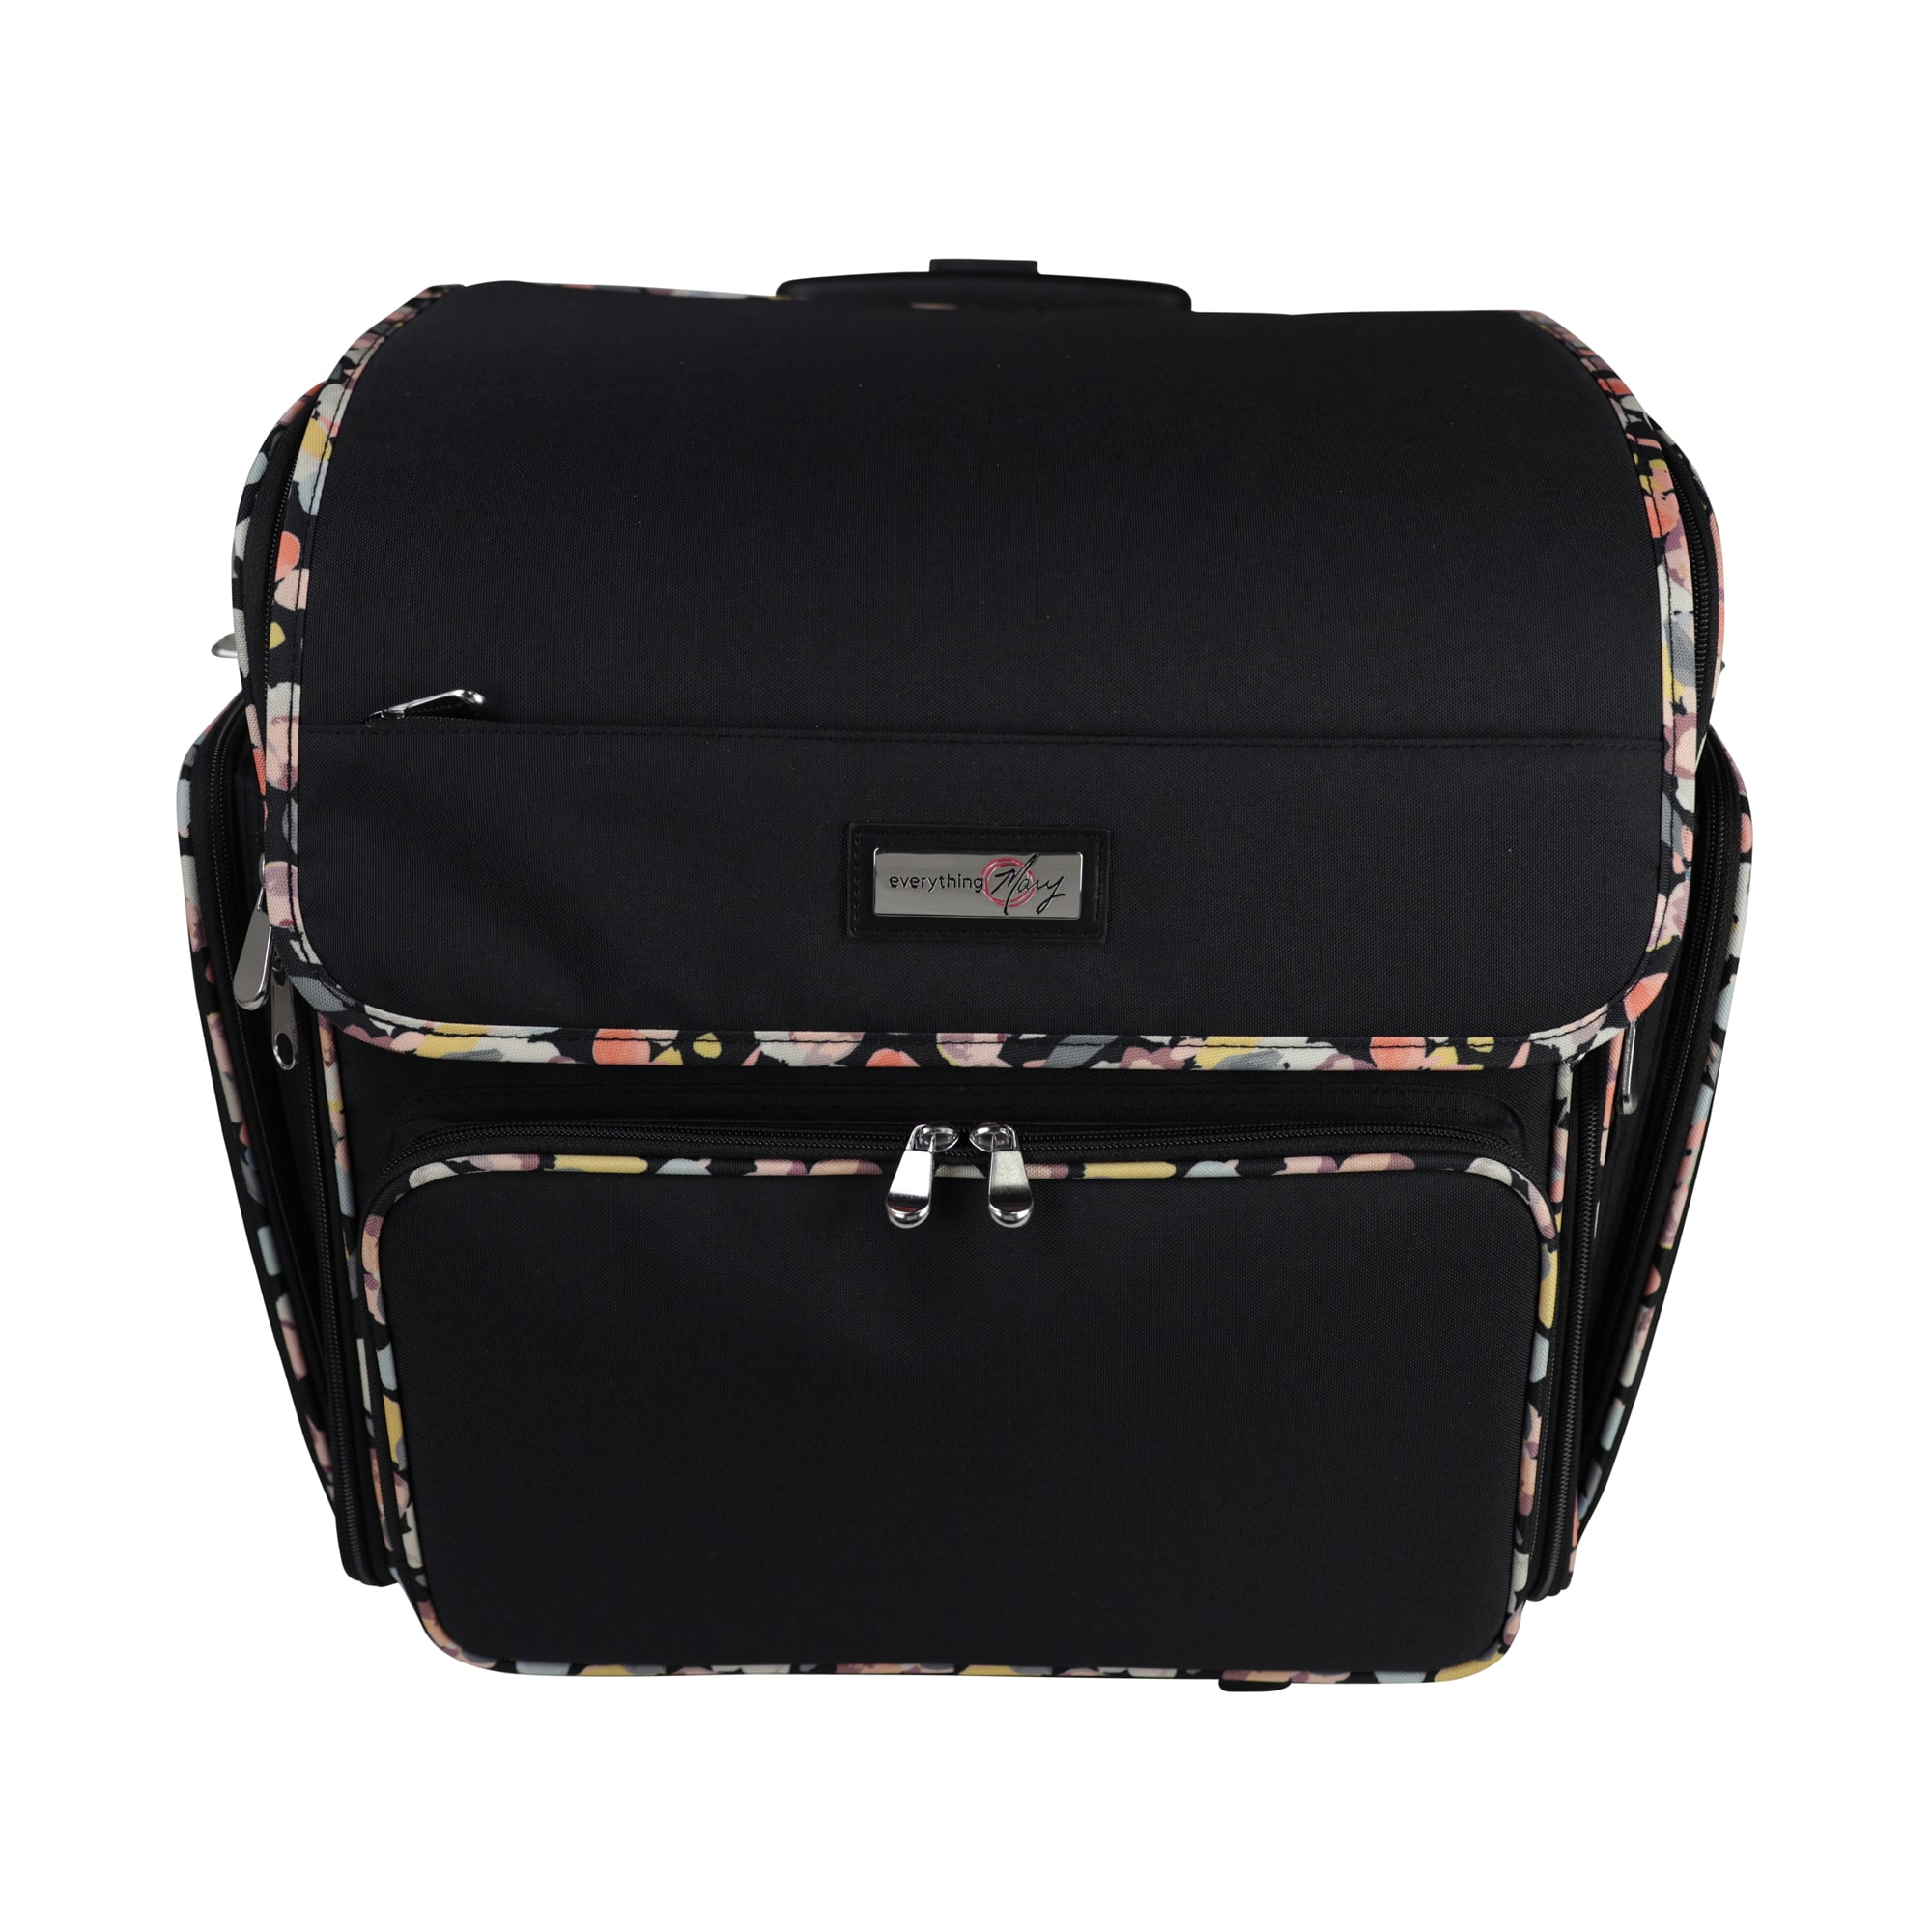 Everything Mary Black Floral Deluxe Collapsible Rolling Craft Bag